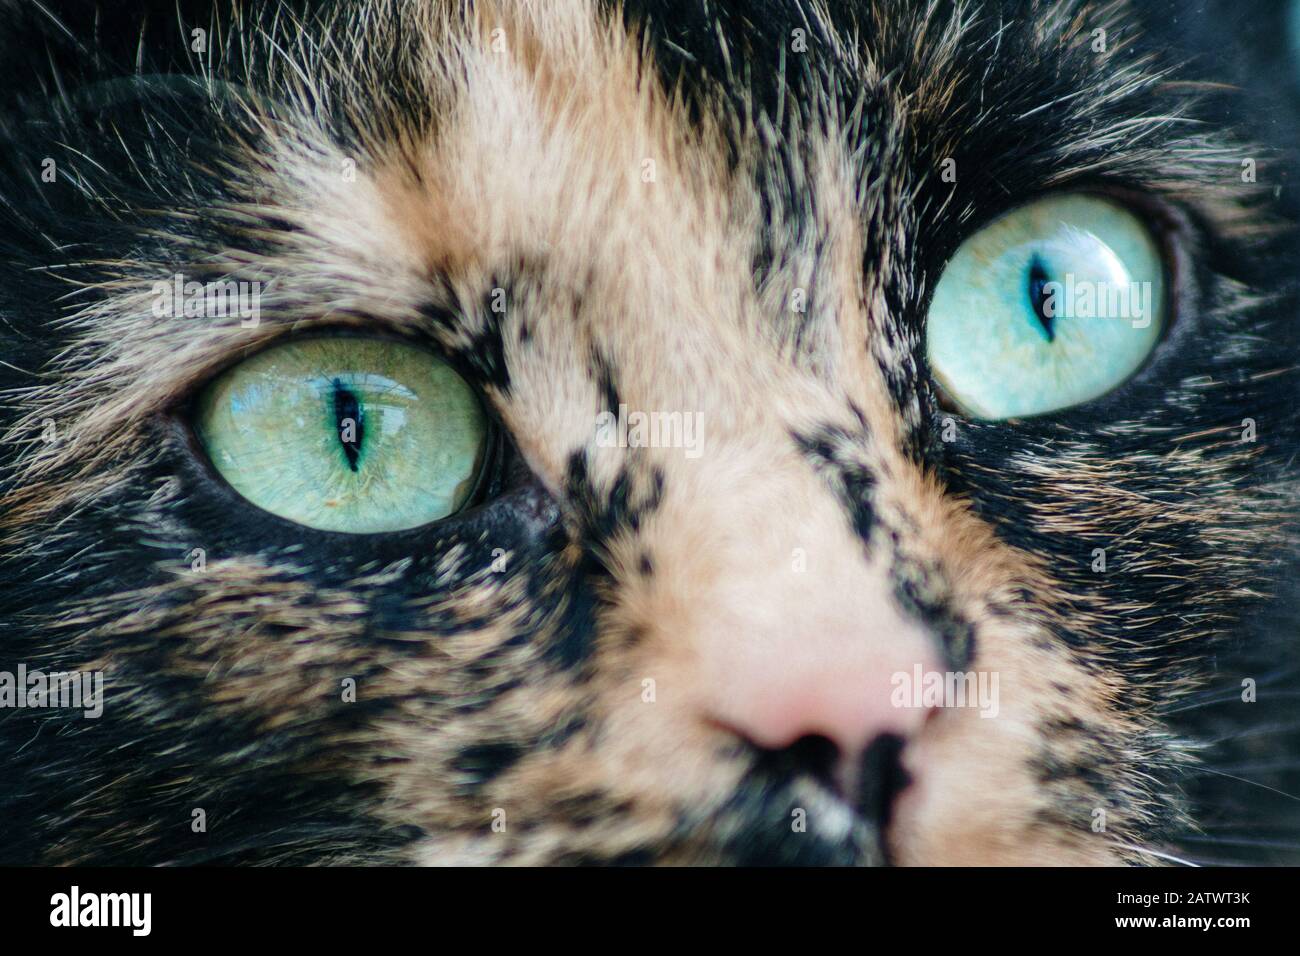 Close up shot of a cats eye Stock Photo